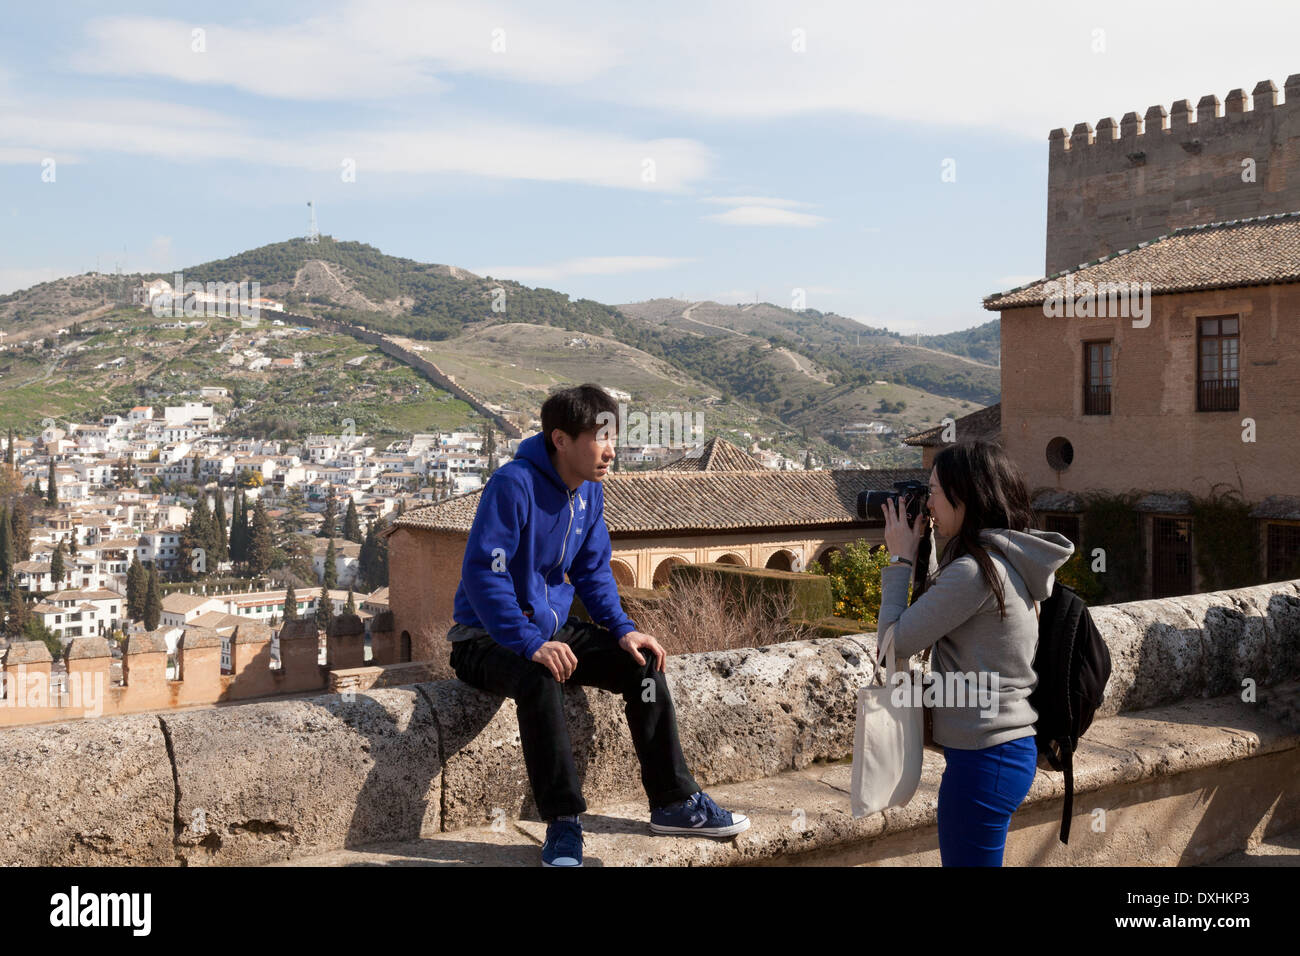 Japanese tourists in Europe - at the Alhambra Palace, Granada, Andalusia, Spain Stock Photo